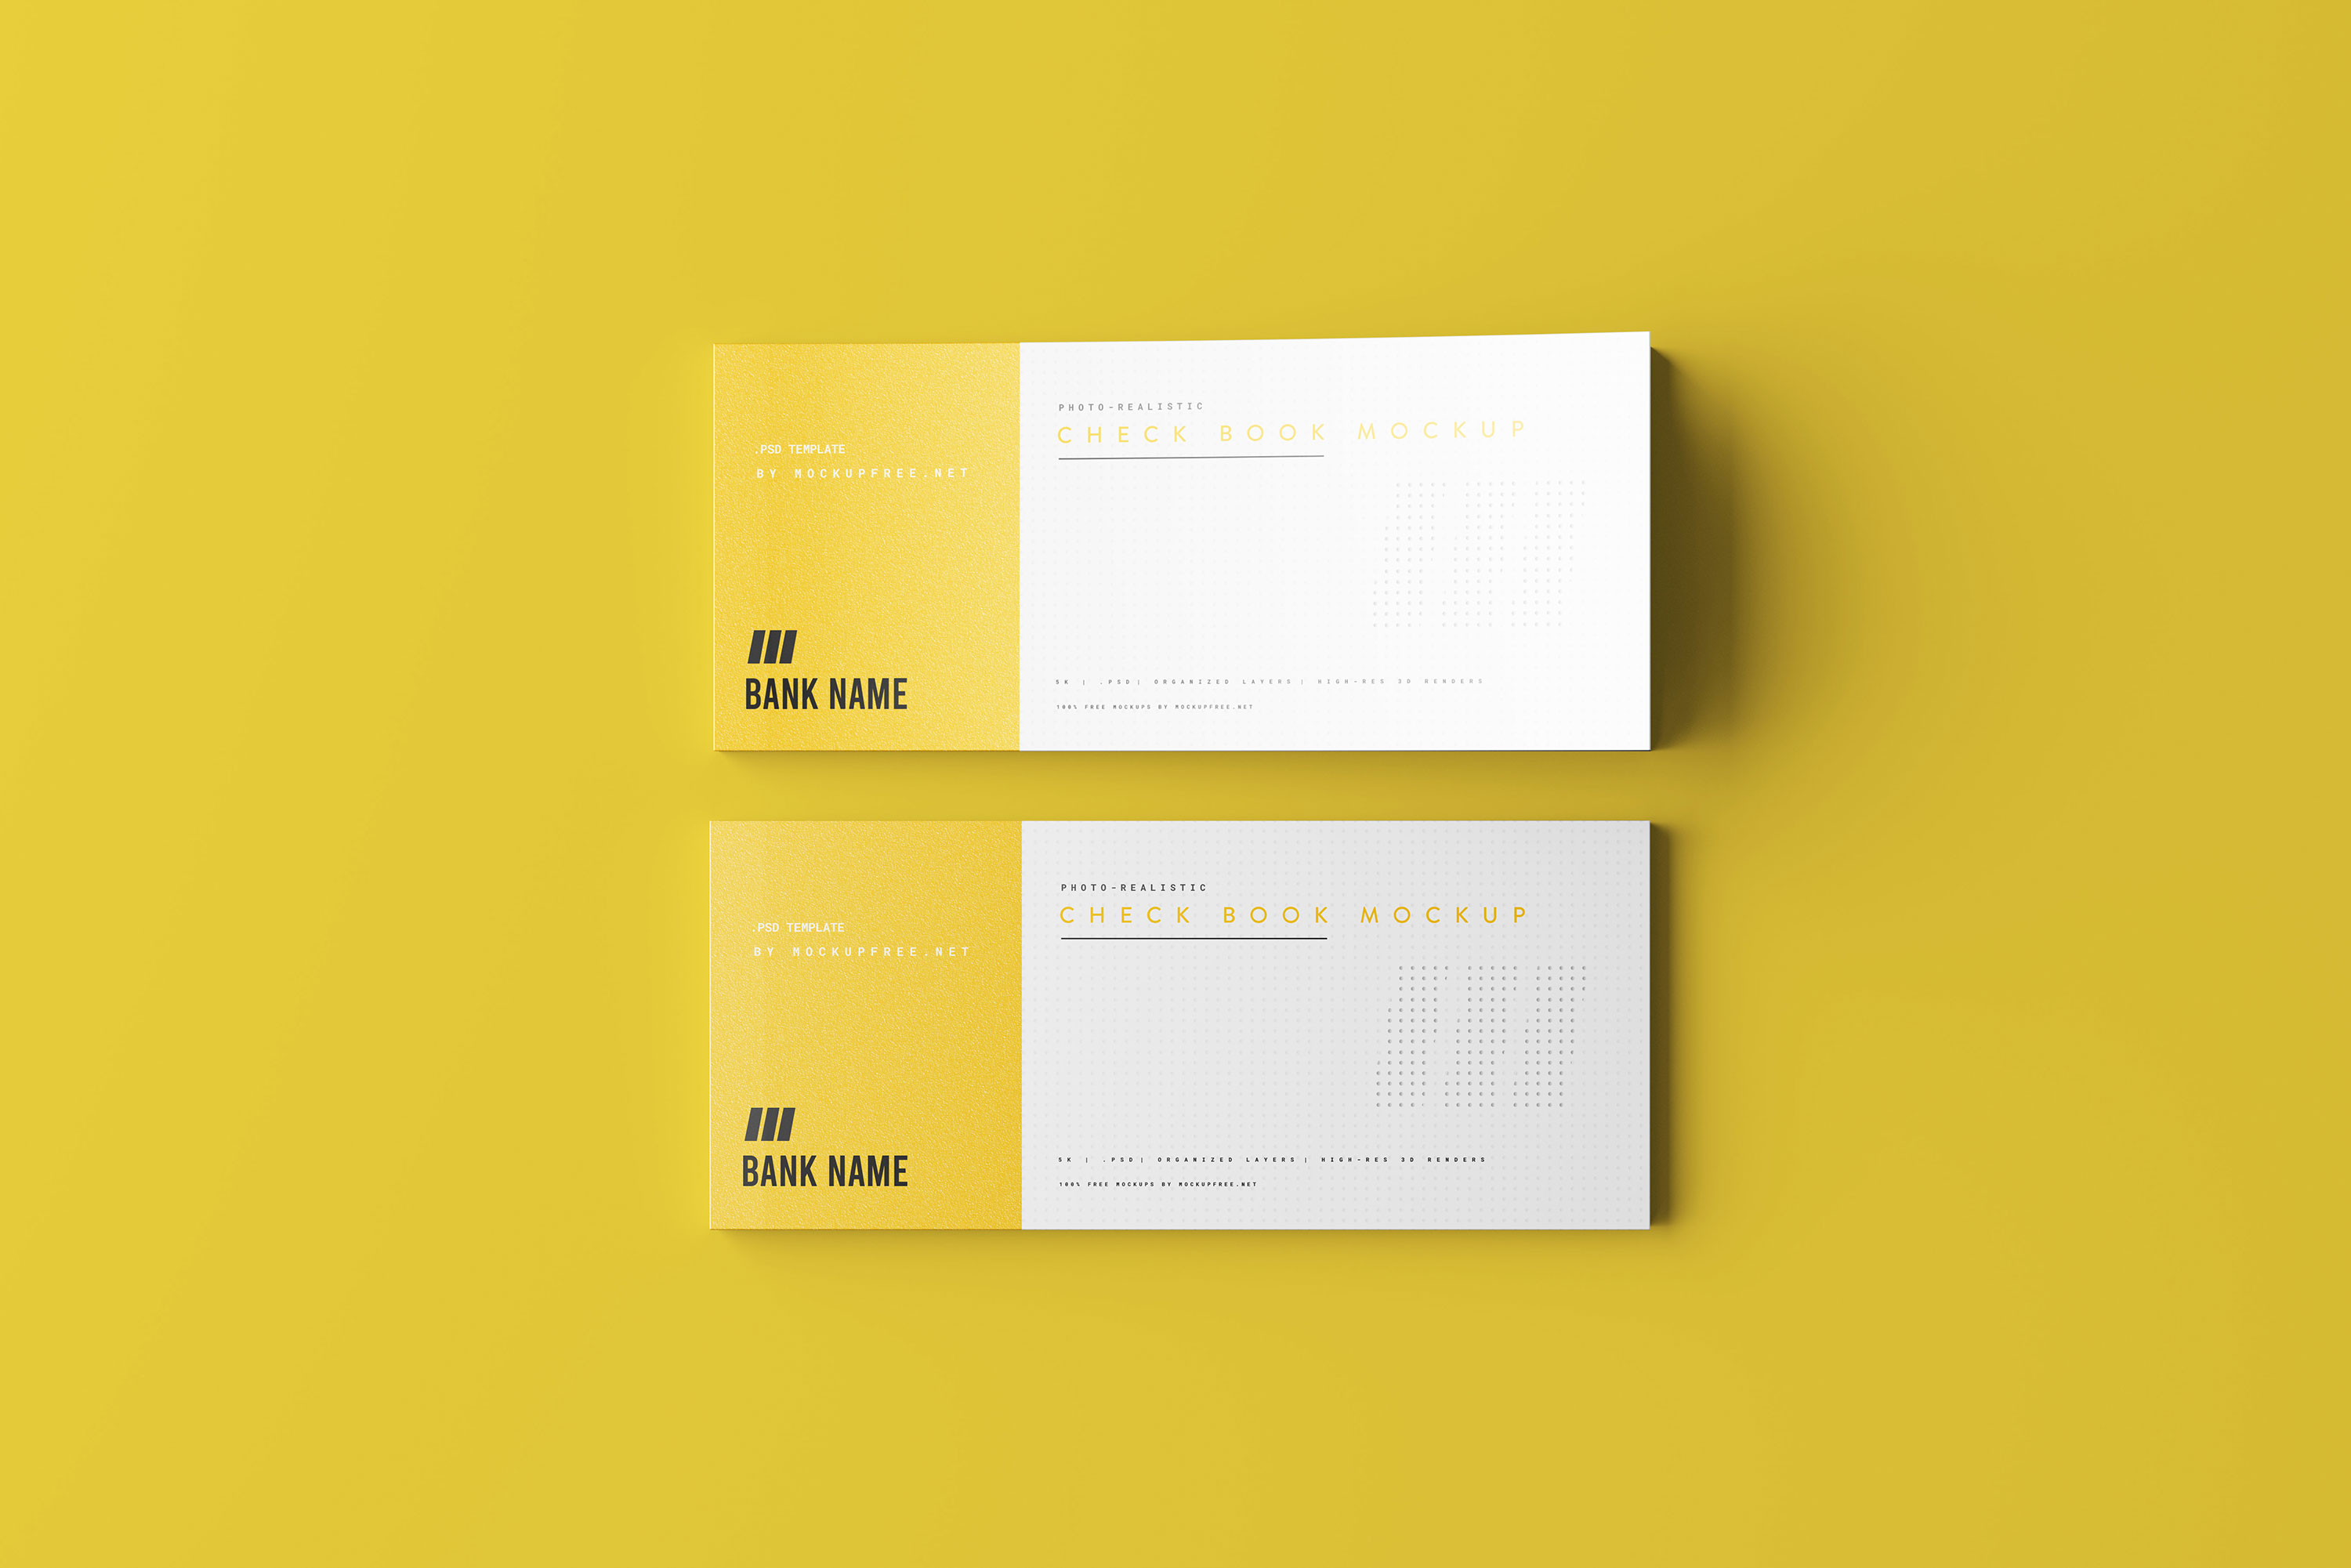 6 Different Views of Paper Check Book Mockups FREE PSD